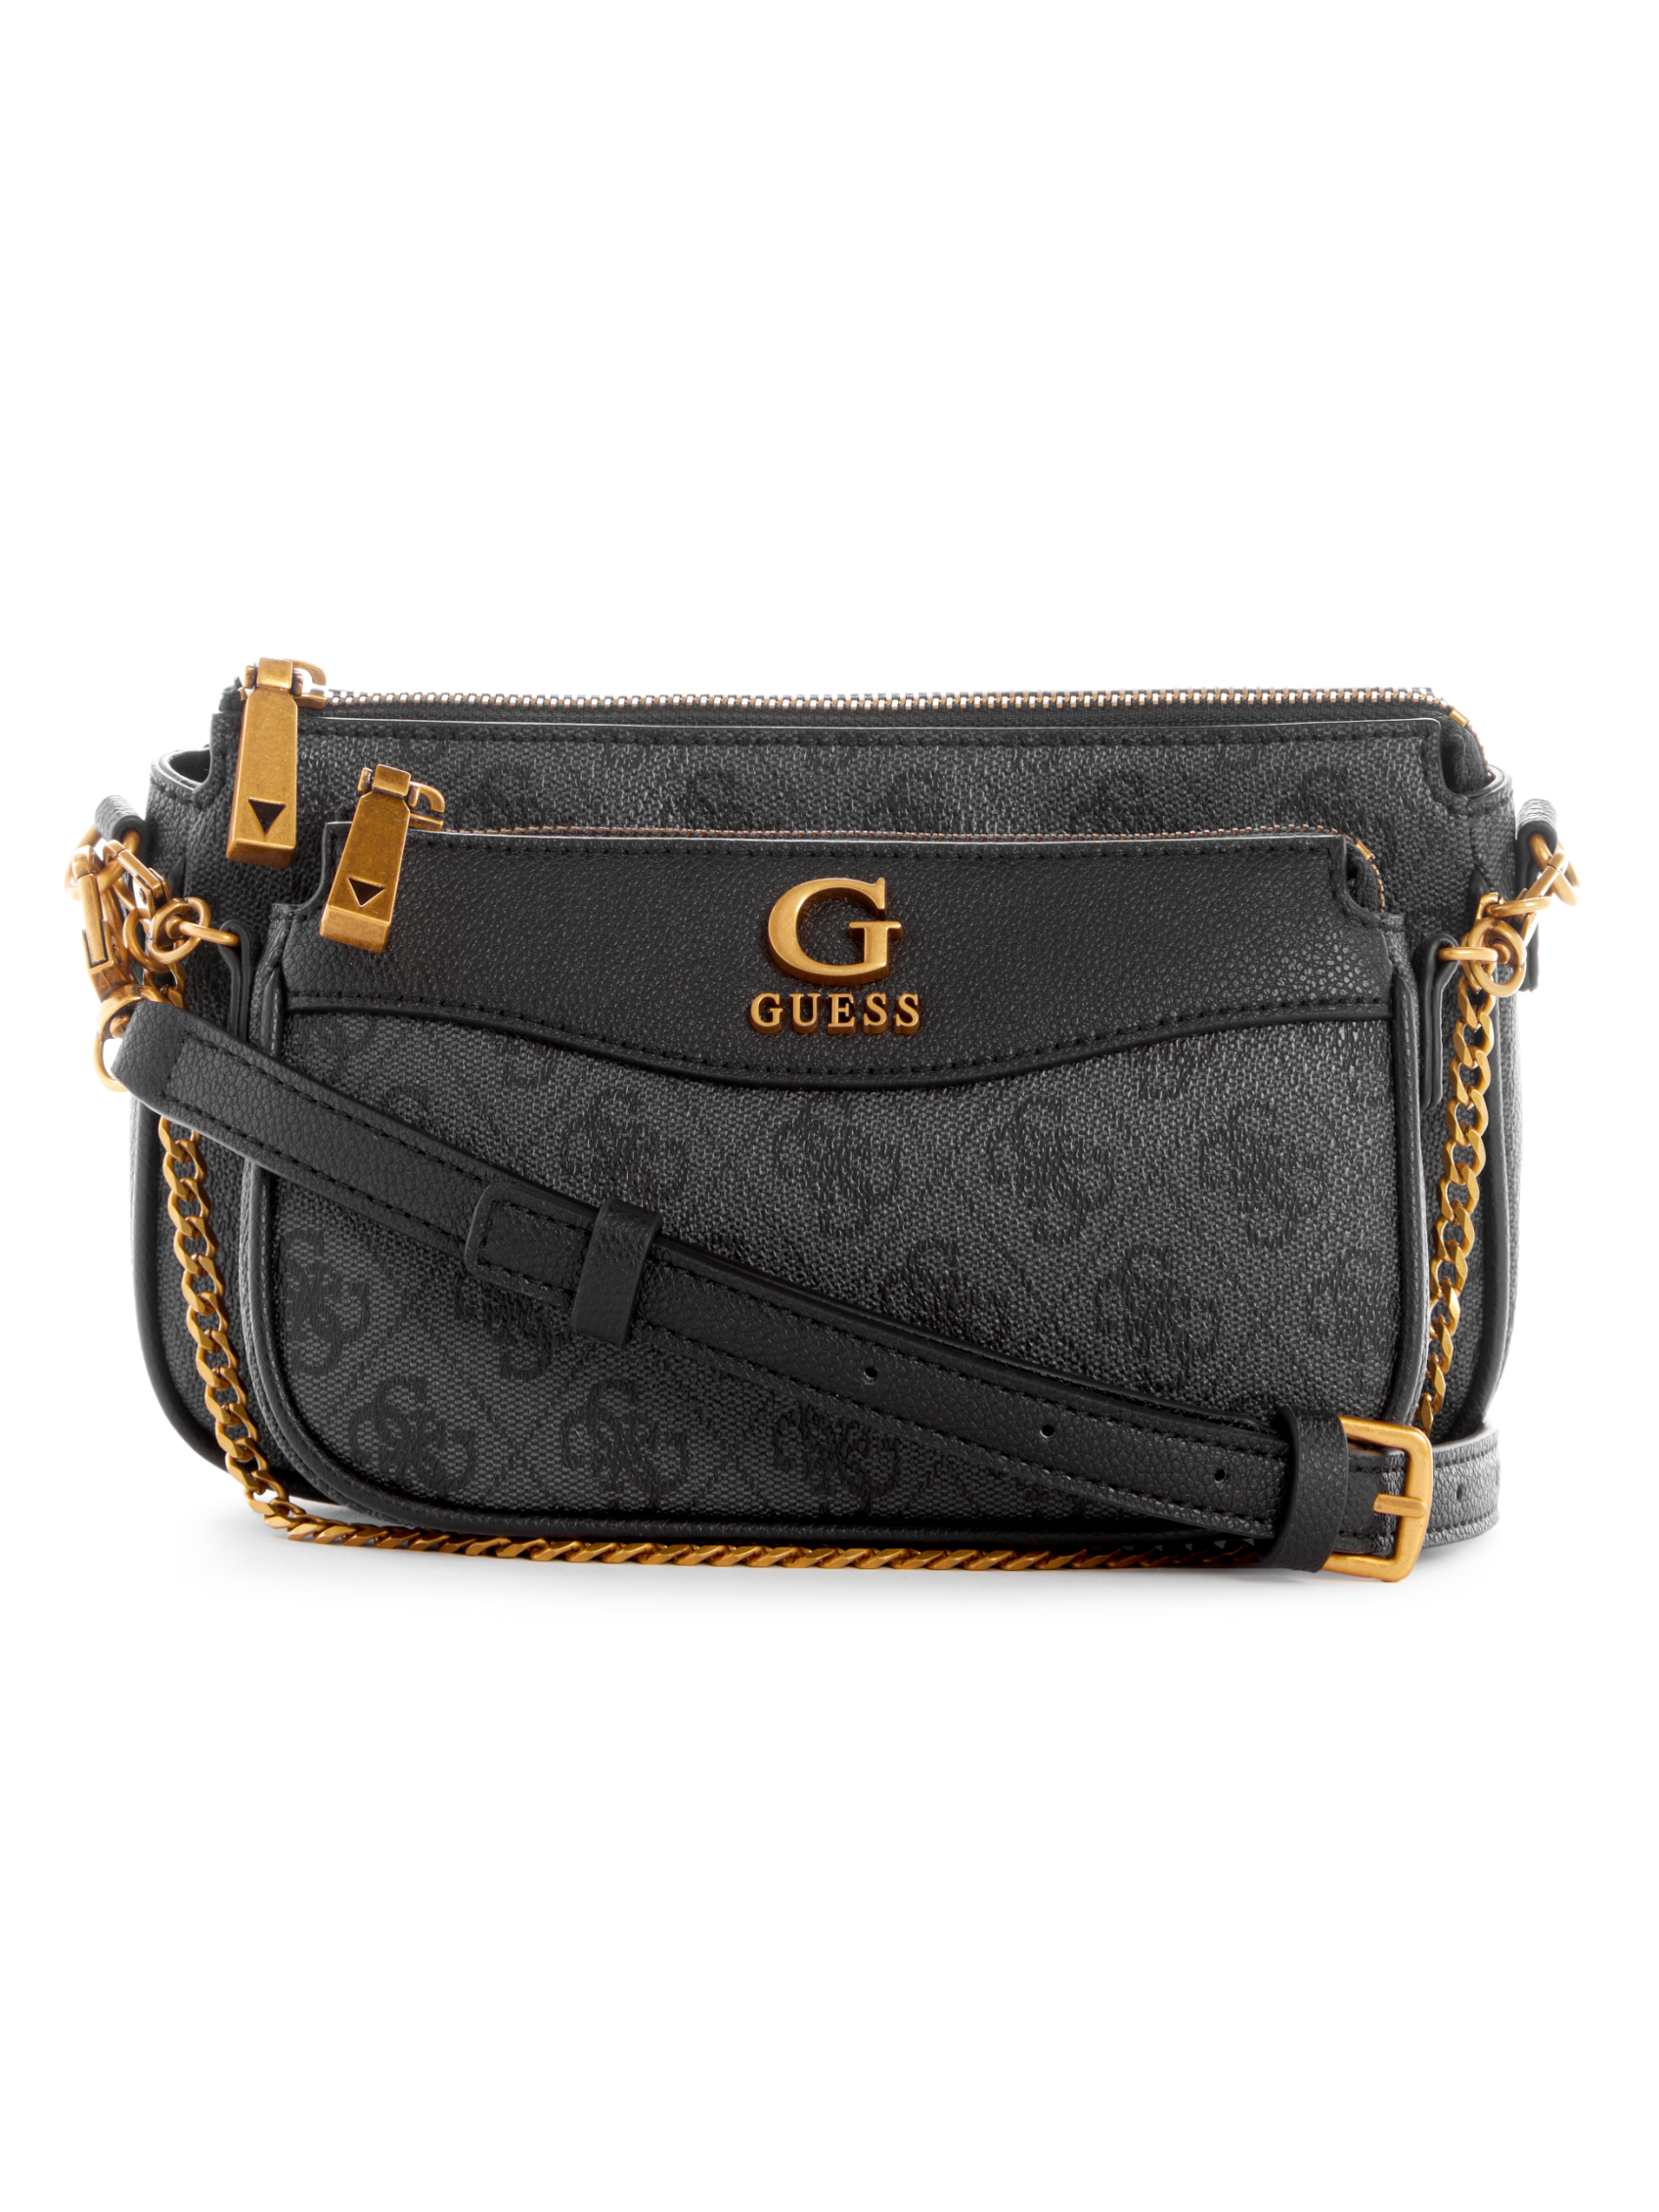 NELL LOGO DOUBLE POUCH CROSSBODY | Guess Philippines